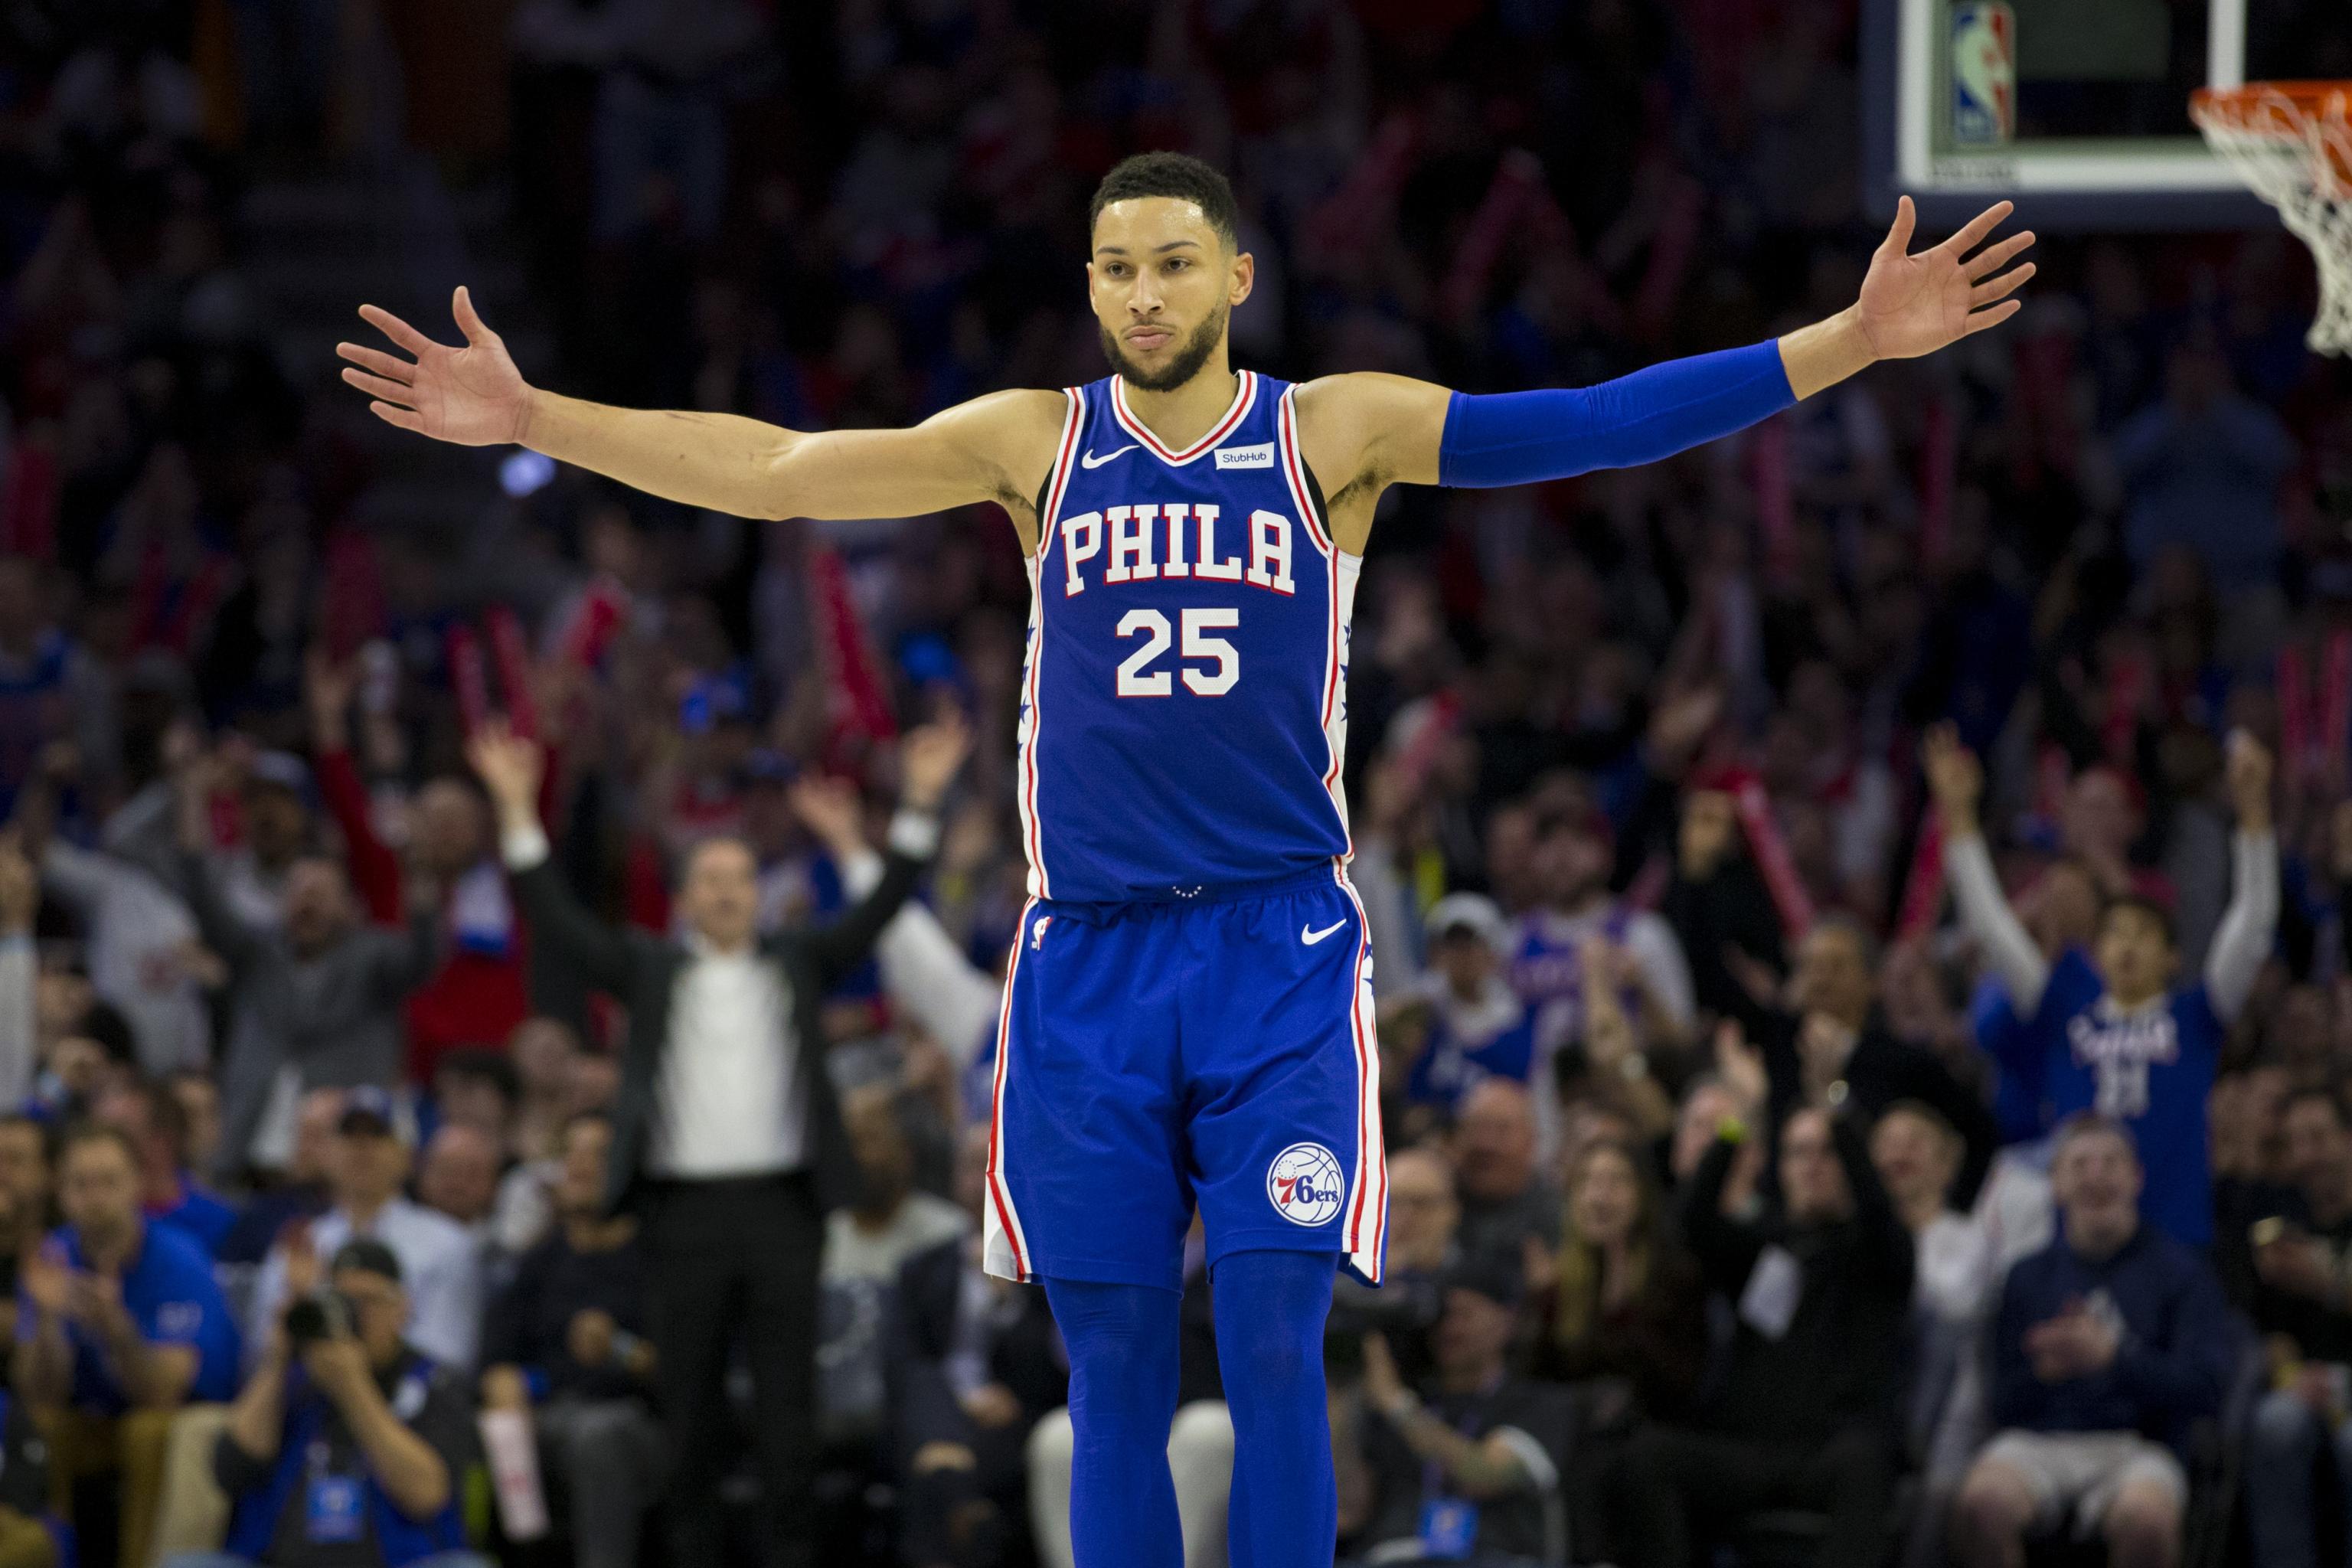 Nba Rumors 76ers Ownership Denied Elton Brand S Request To Trade Ben Simmons Bleacher Report Latest News Videos And Highlights